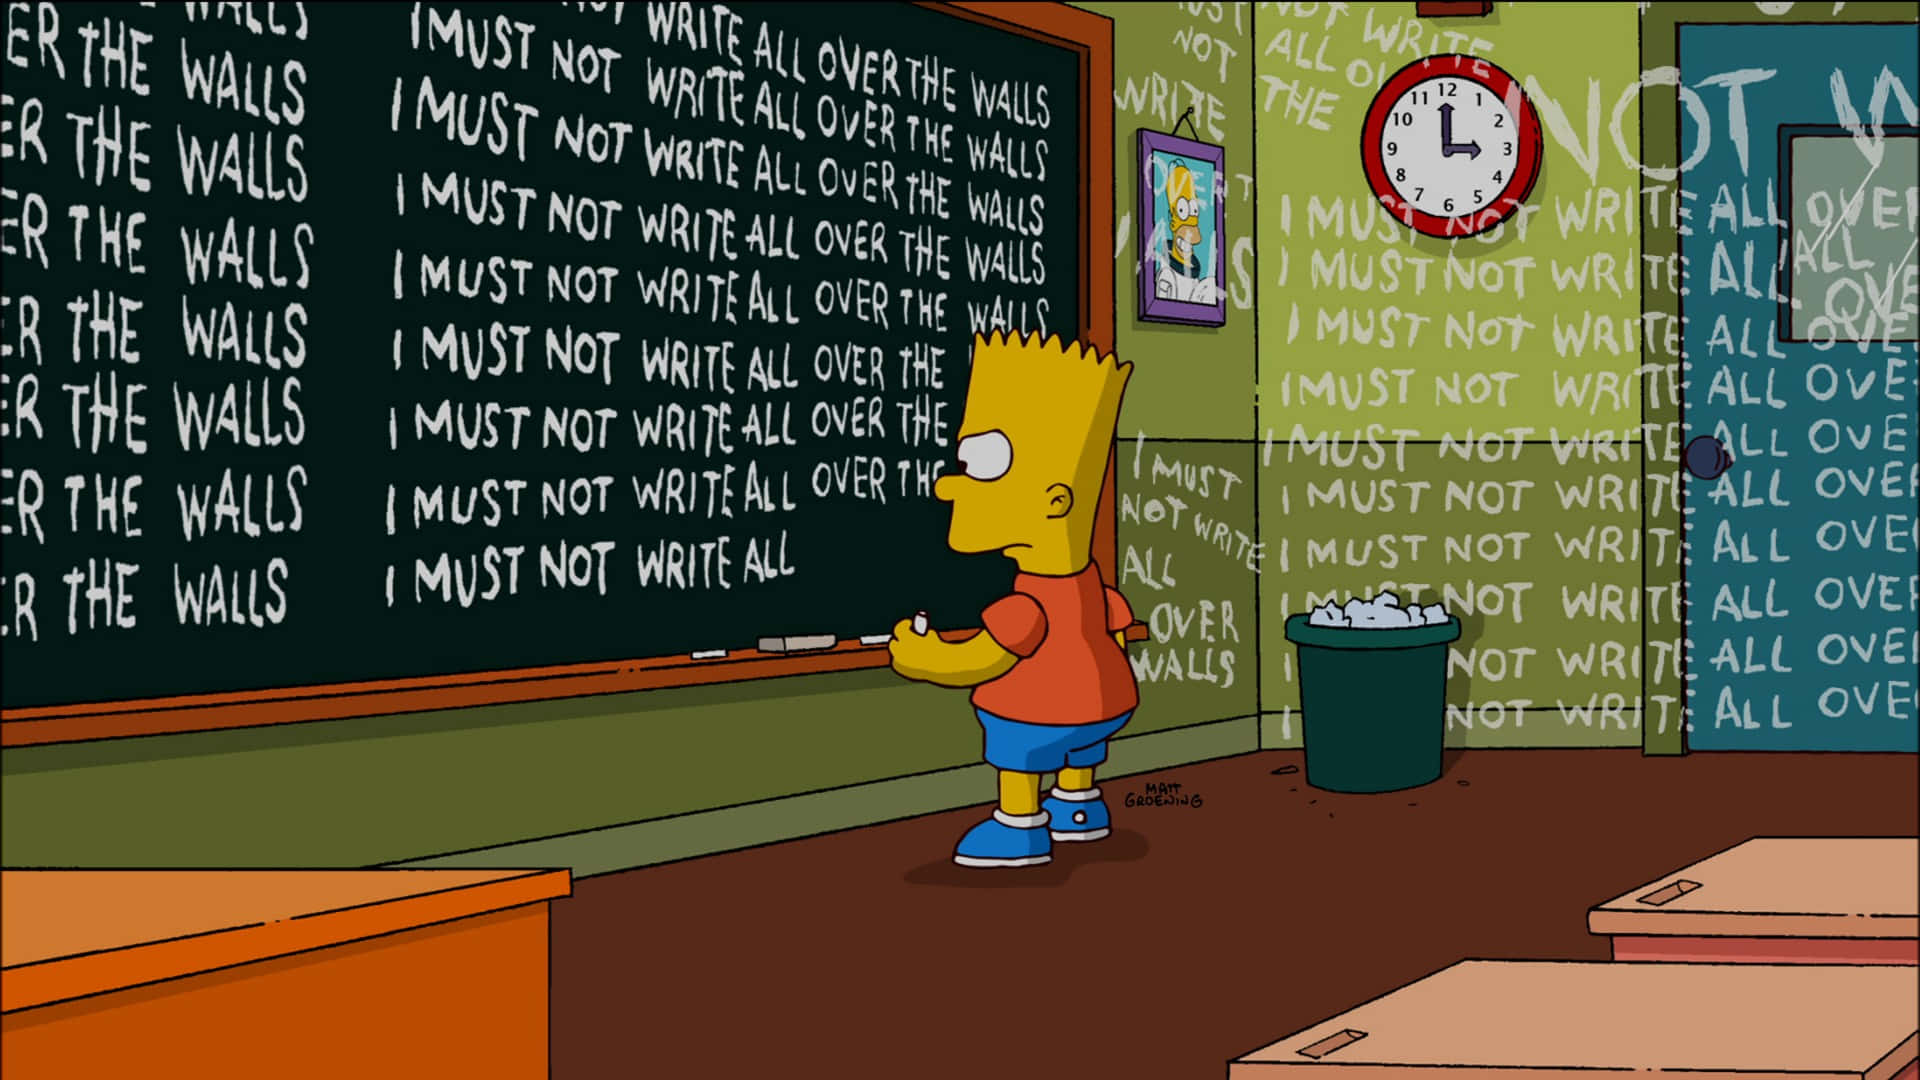 Get the work done on PC with this awesome The Simpsons theme! Wallpaper